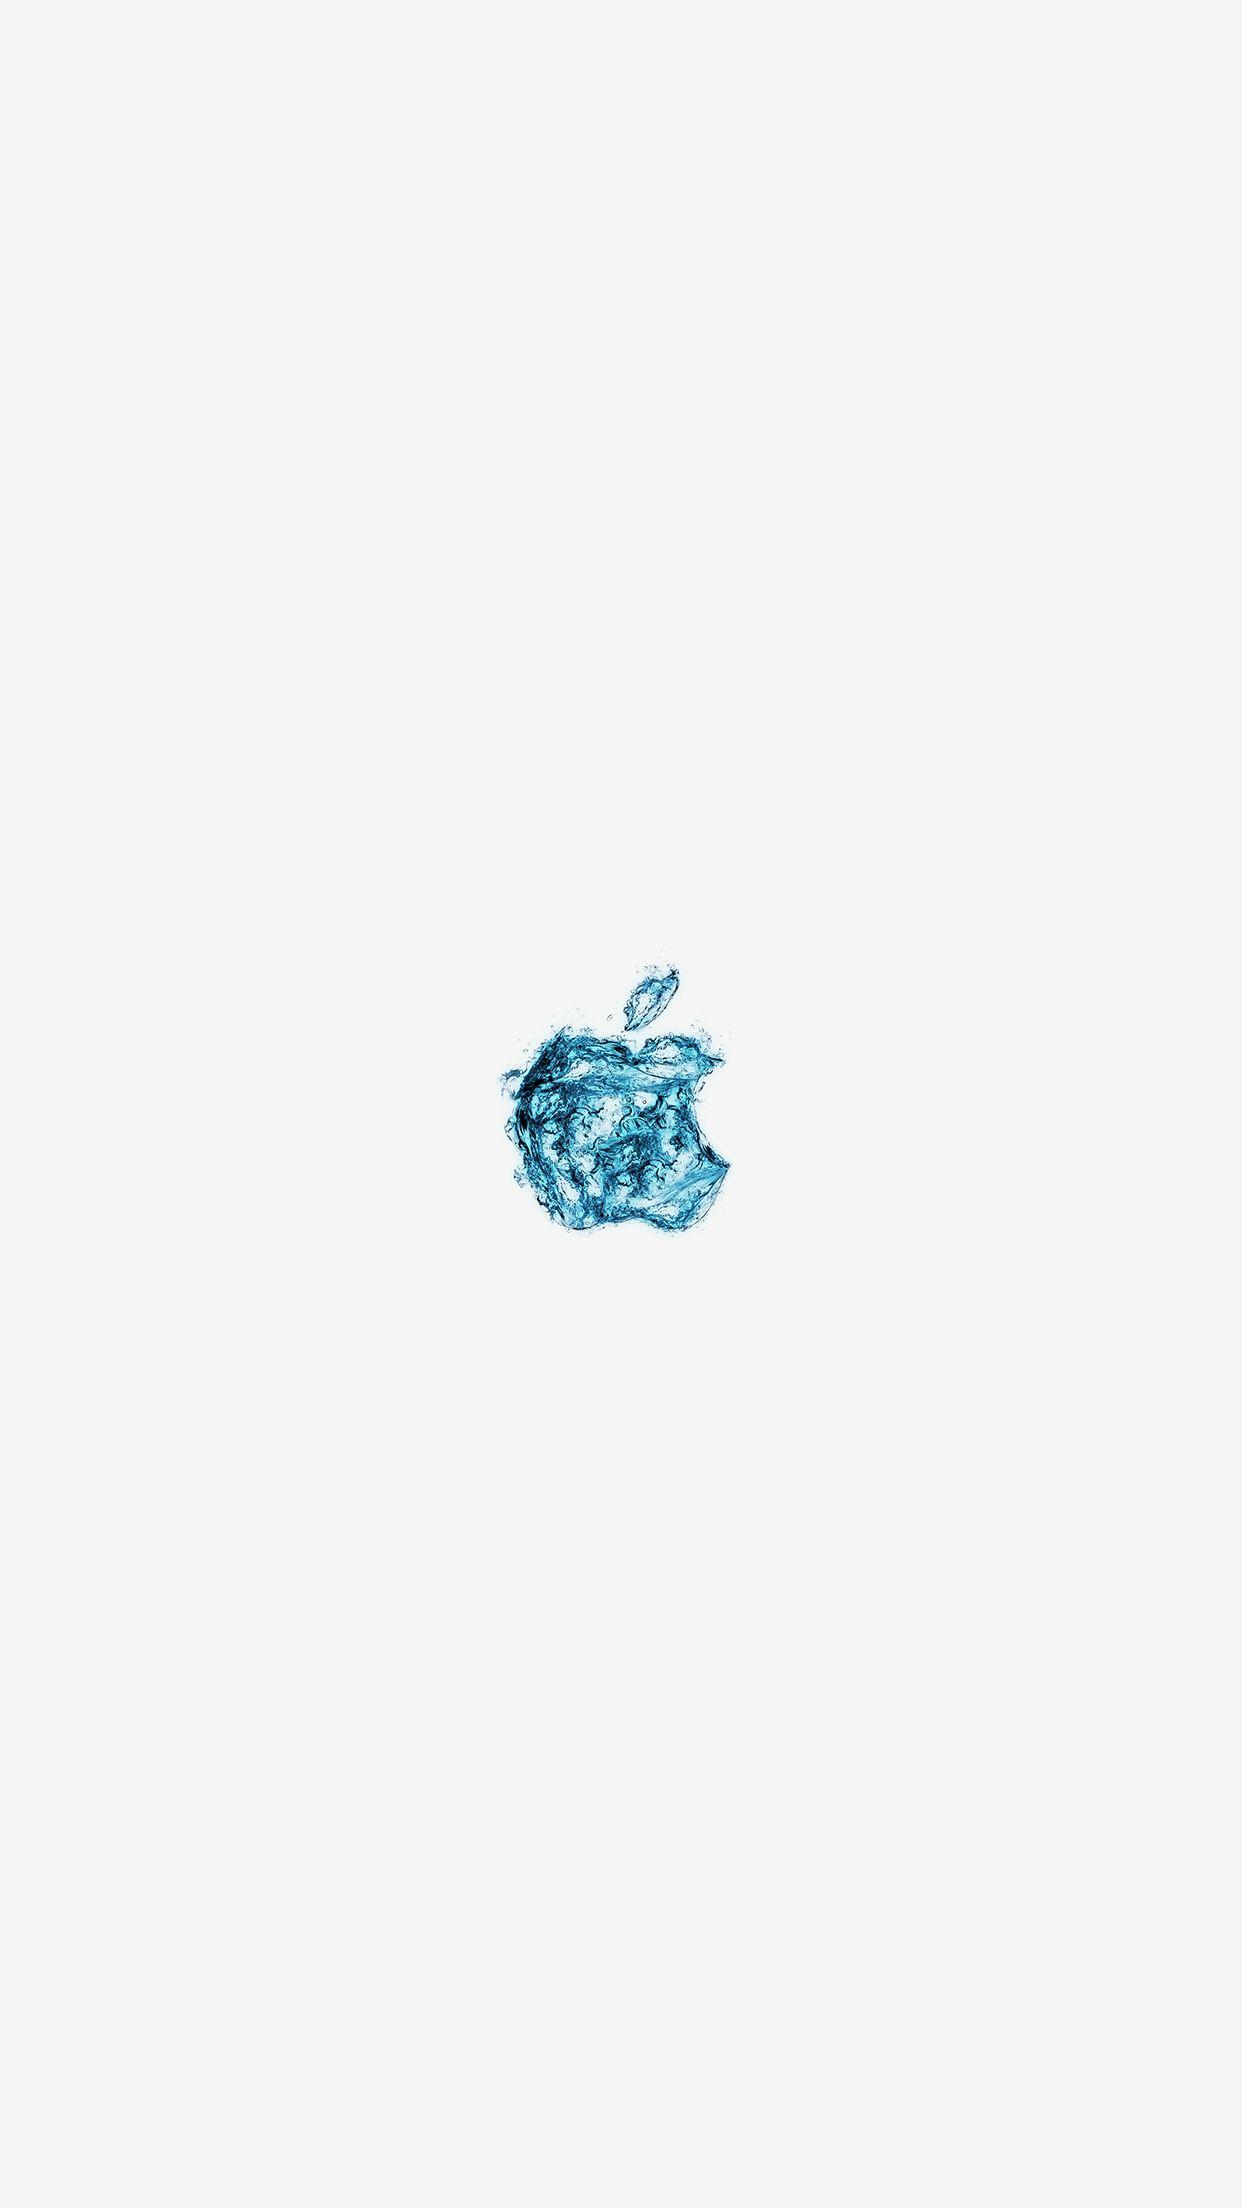 Blueand White Apple Logo - iPhone7papers.com | iPhone7 wallpaper | at08-apple-logo-water-white ...